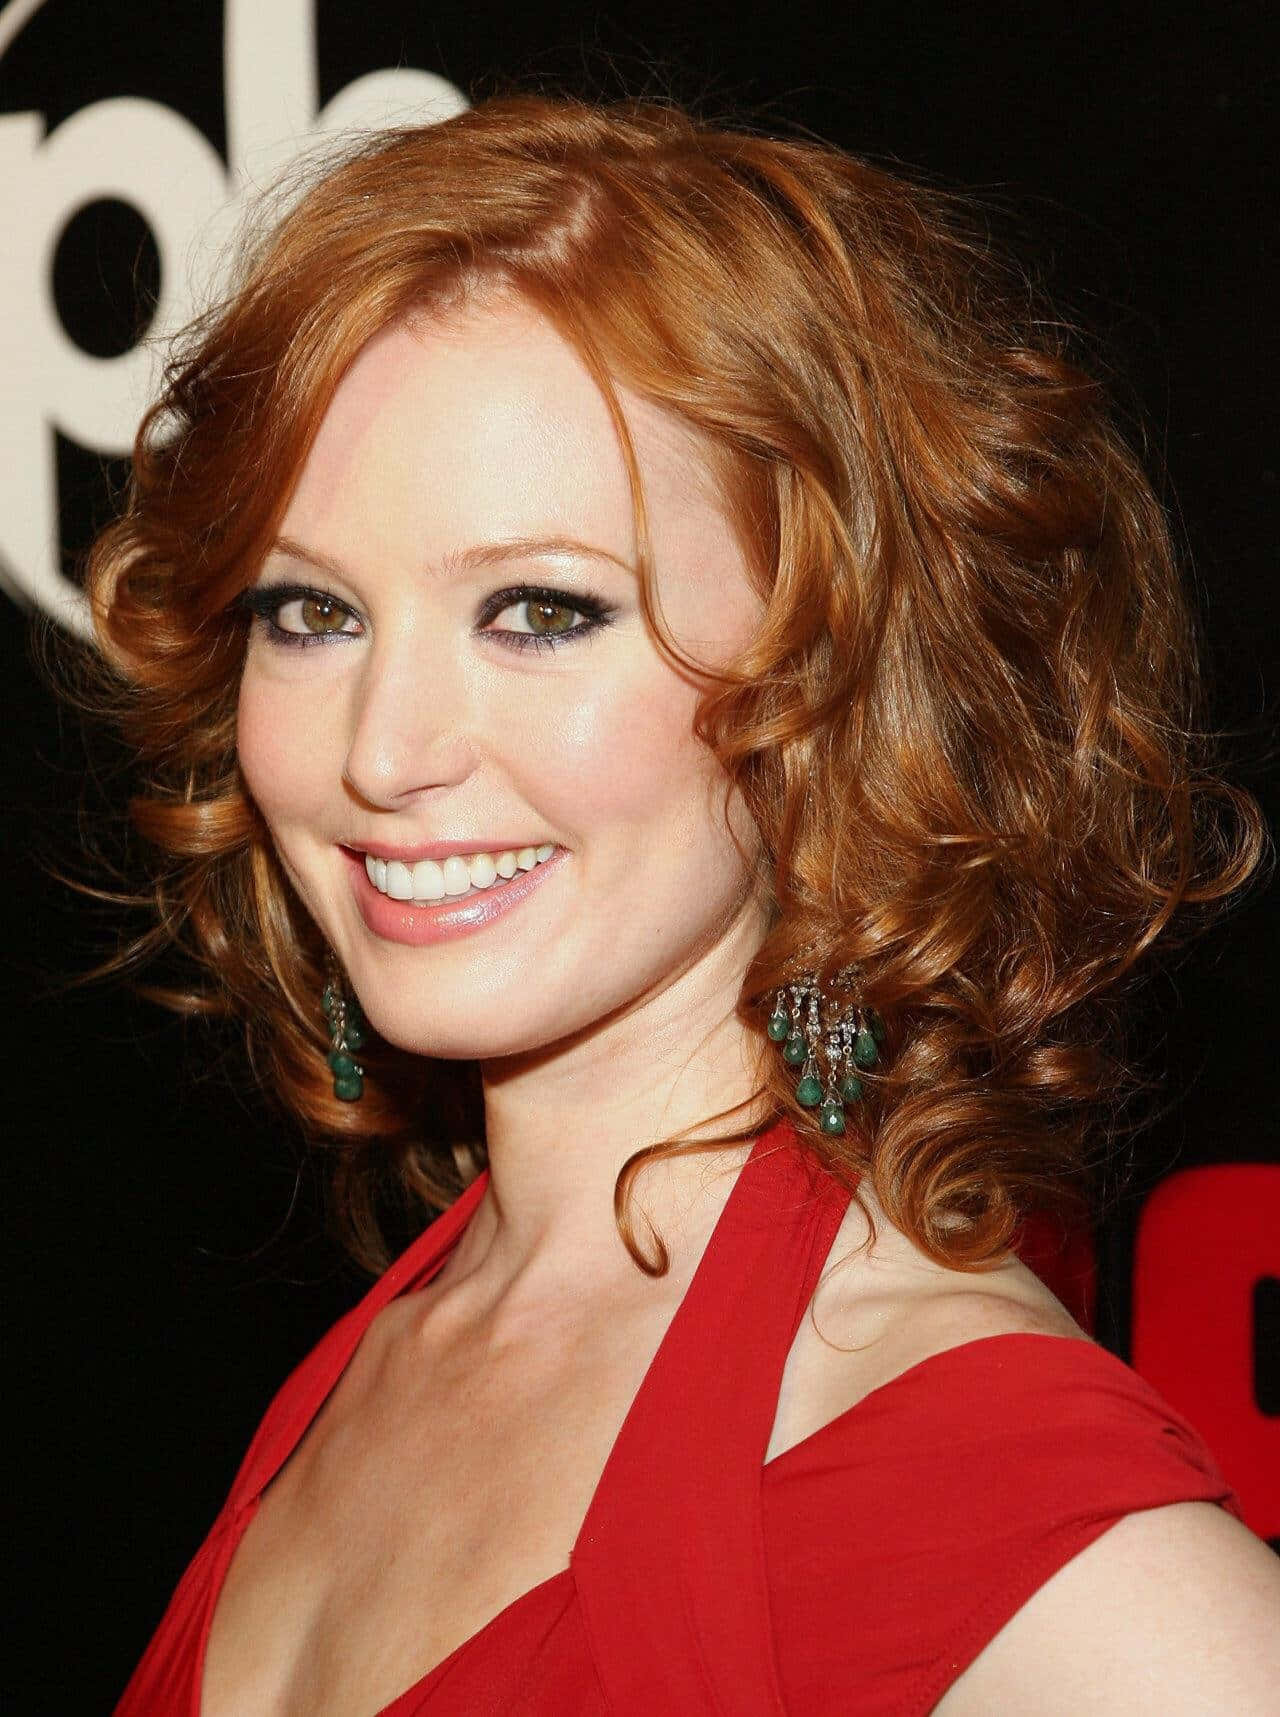 Alicia Witt Smiling in Red Outfit Wallpaper